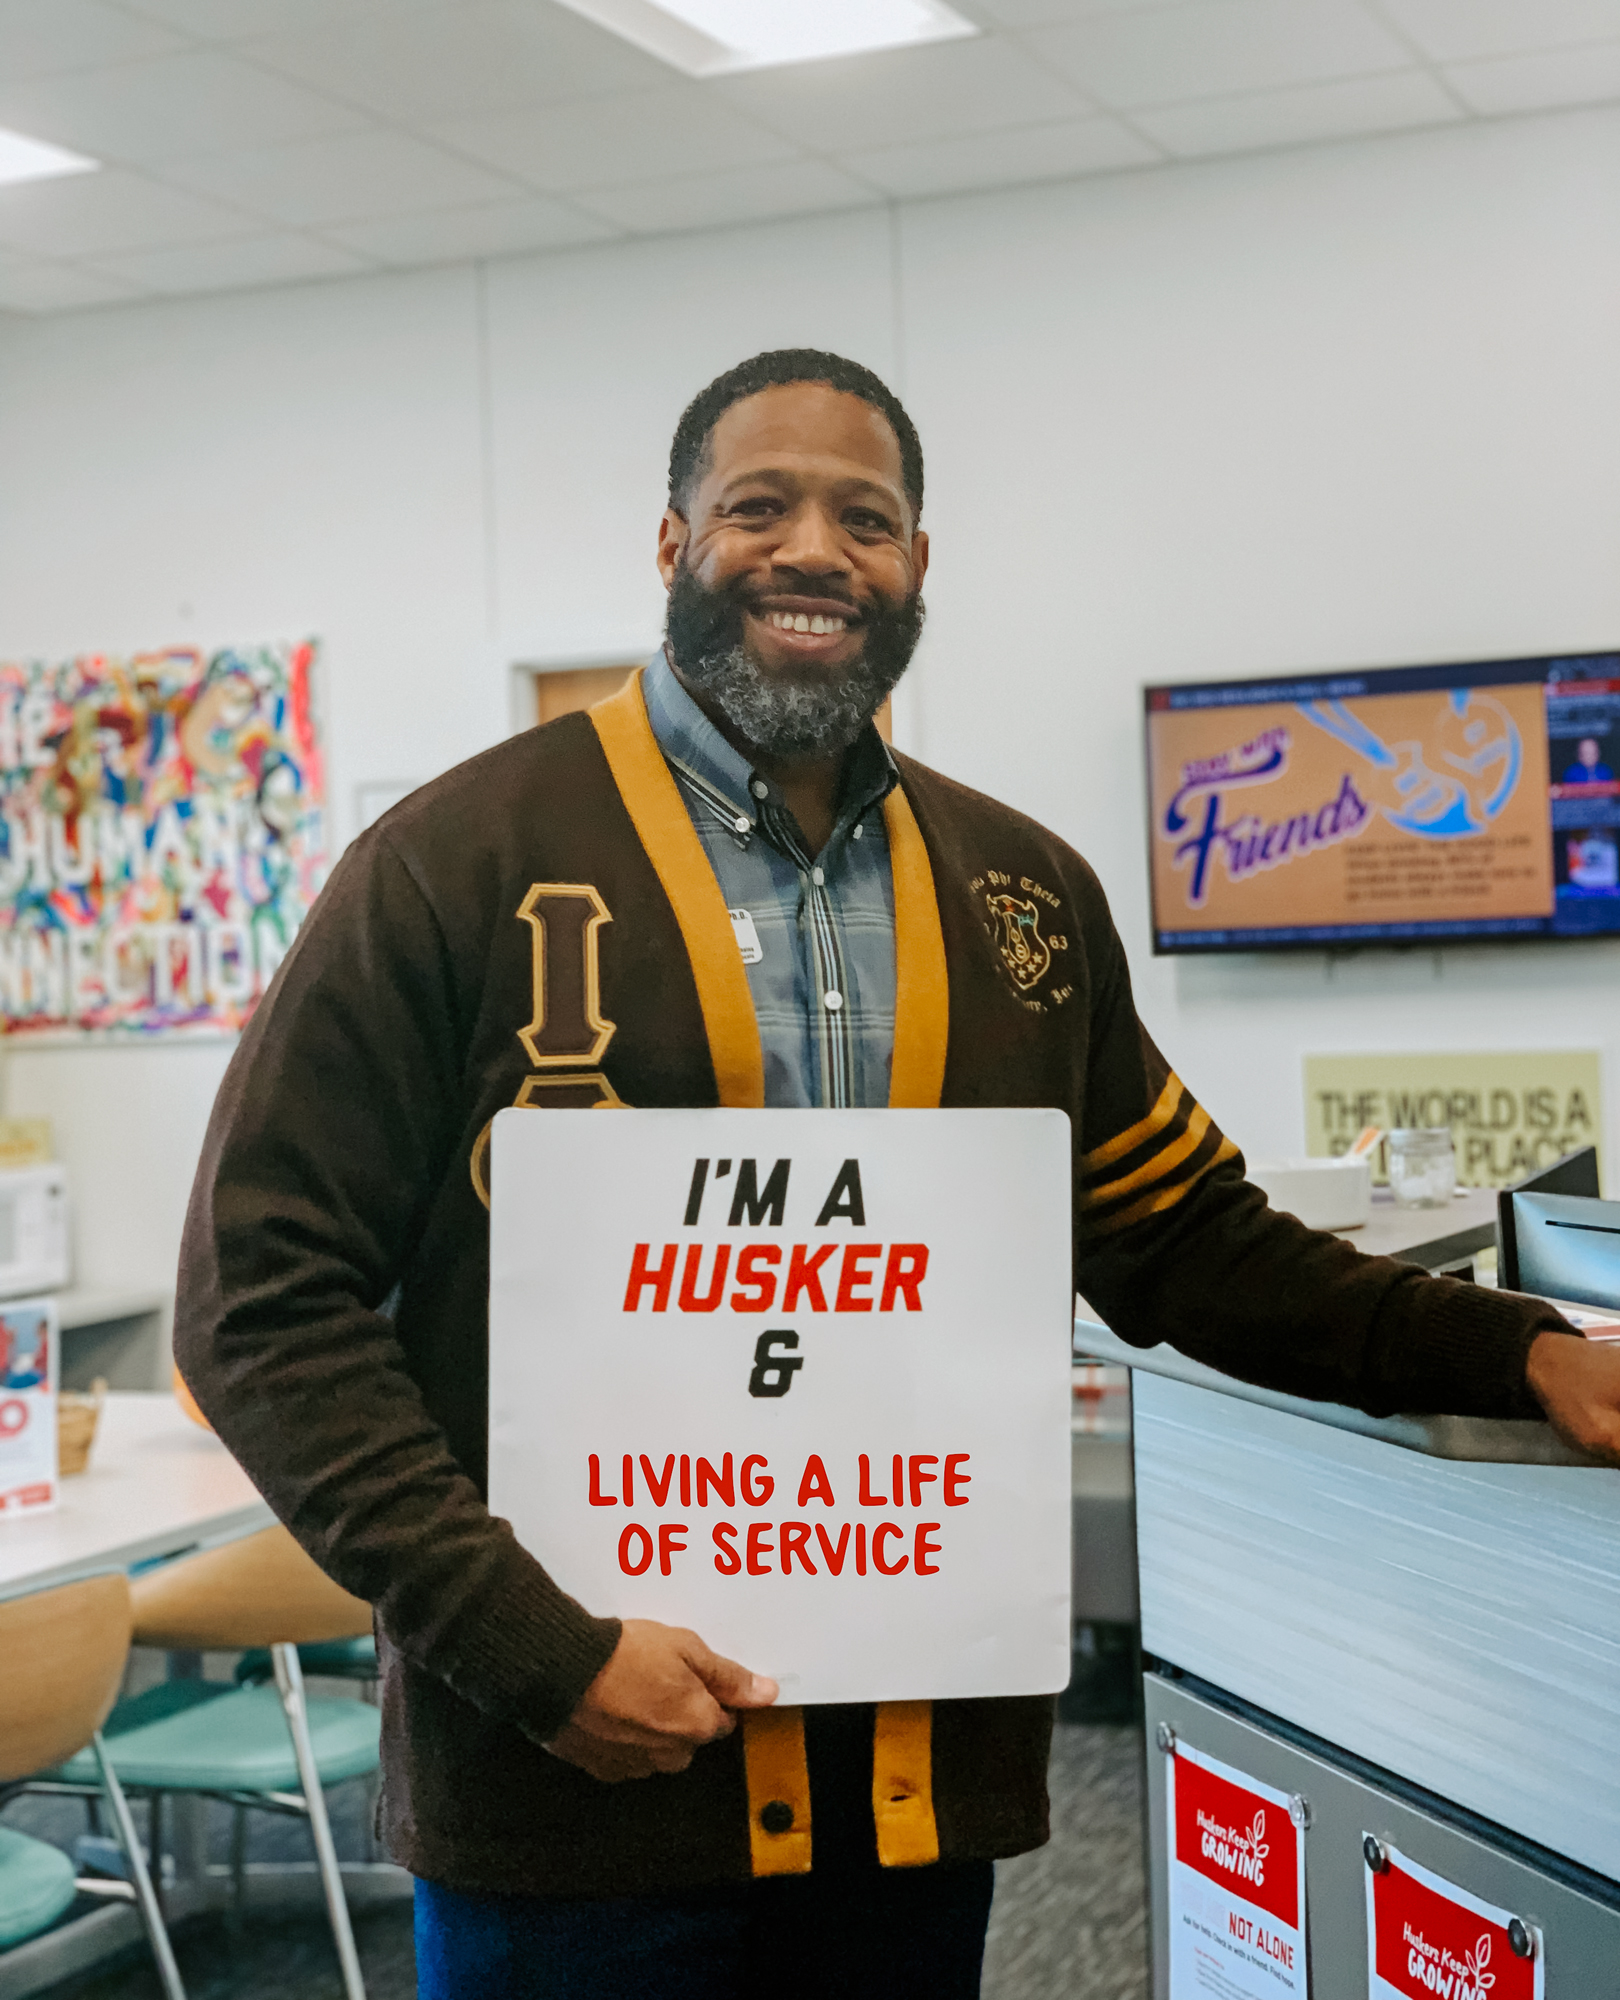 Kenji smiles for a photo with a sign that says "I'm a Husker & living a life of service"